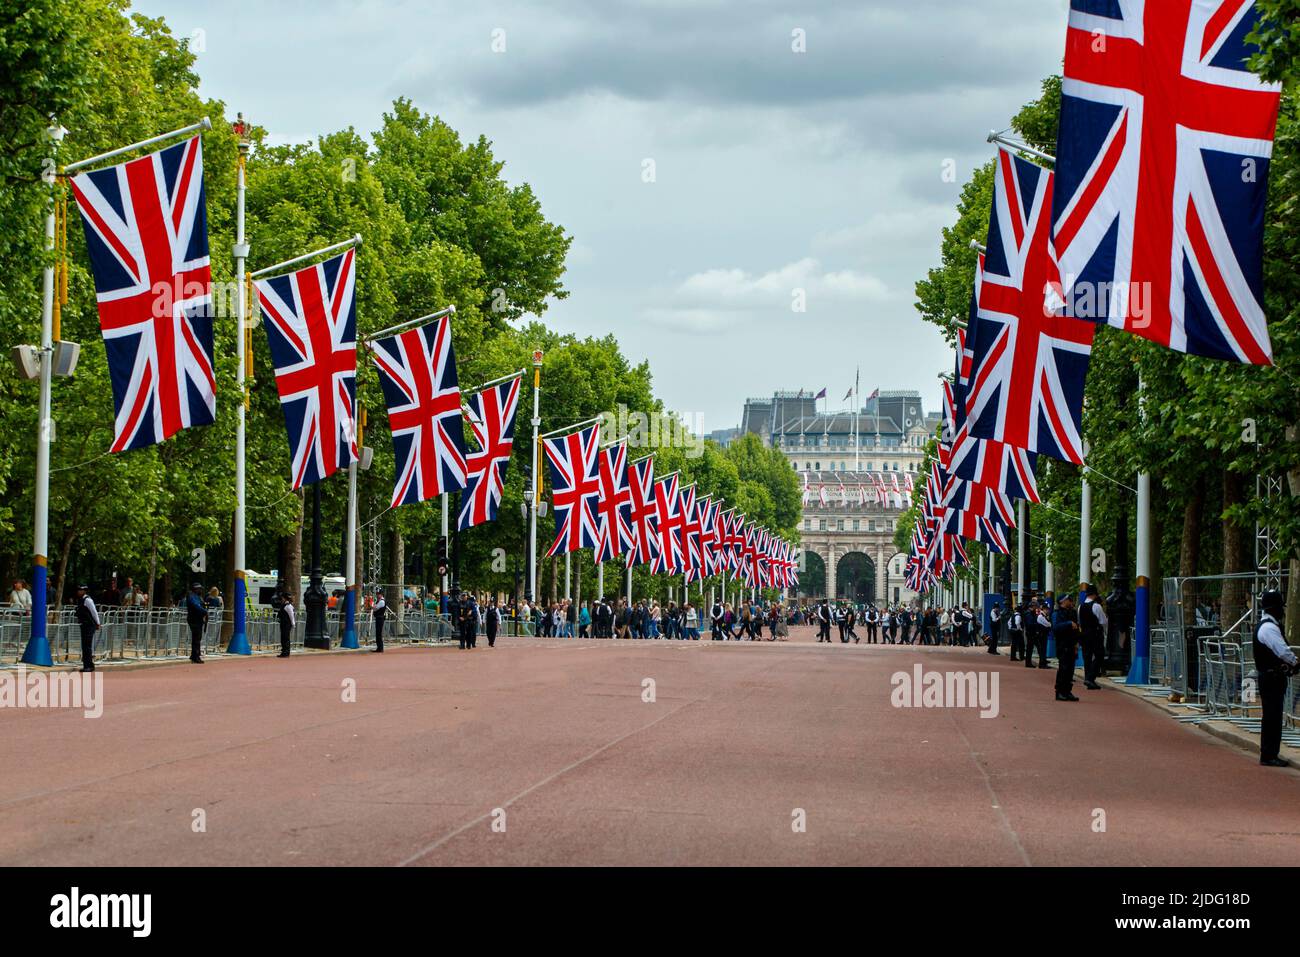 Trooping the Color Probesals, The Mall, London England, Vereinigtes KönigreichSamstag, 21. Mai, 2022.Foto: David Rowland / One-Image.com Stockfoto